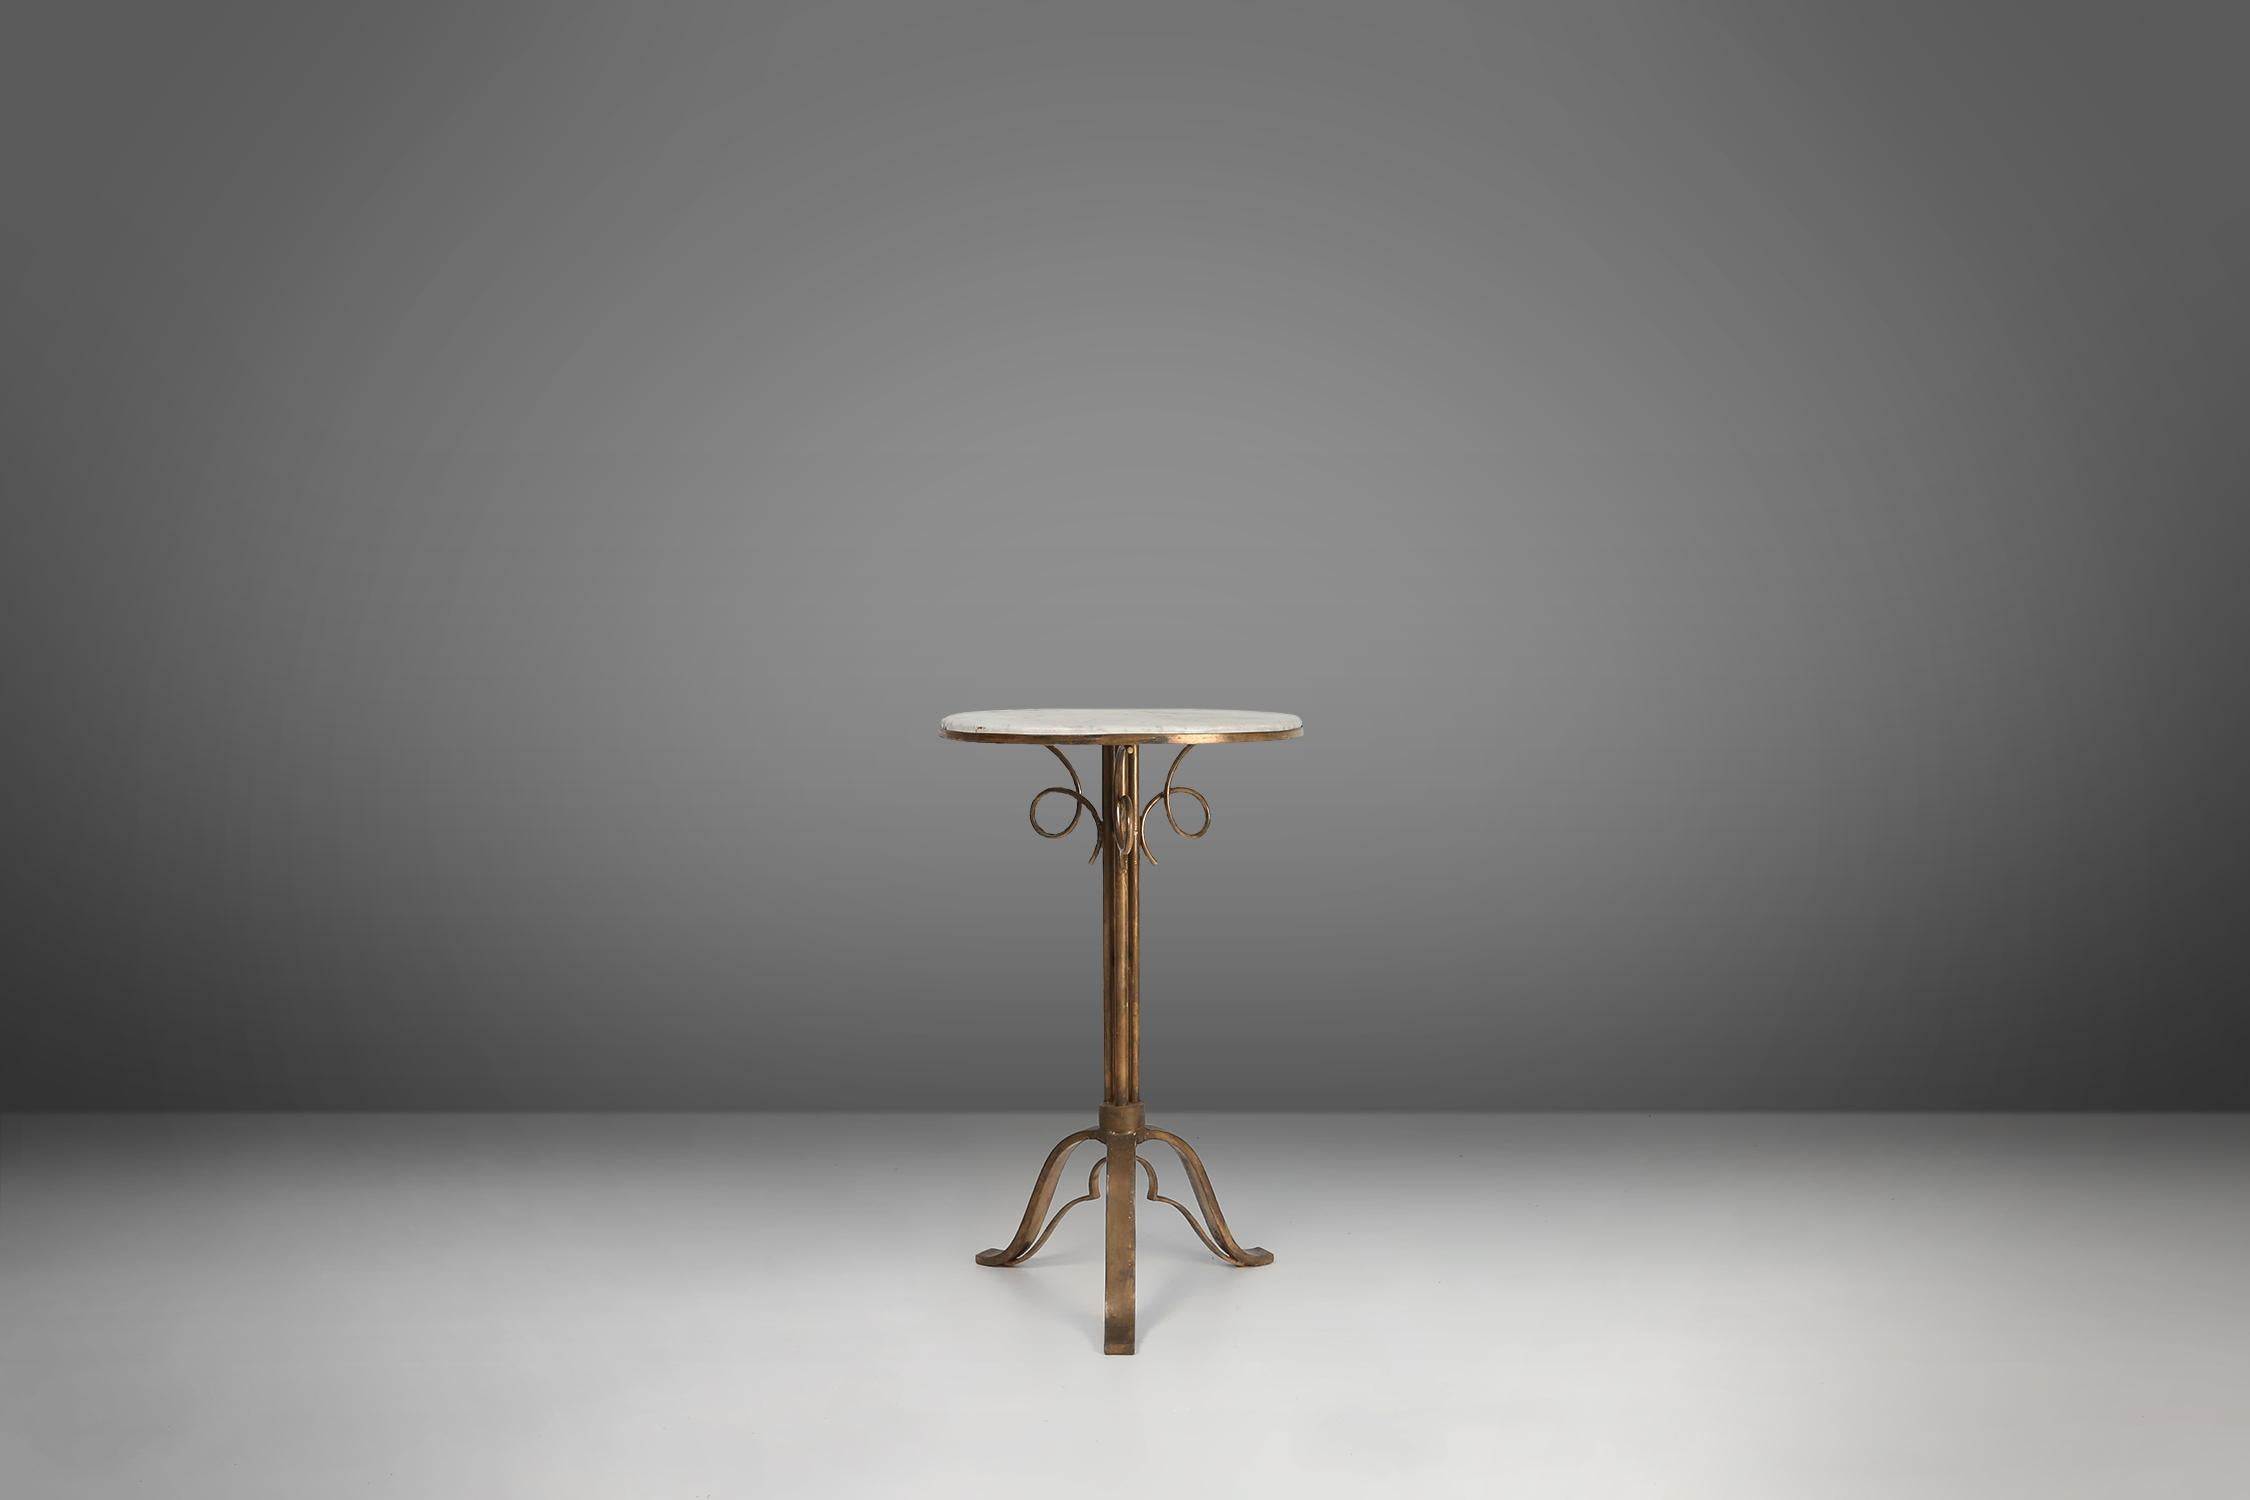 Sophisticated Art Deco Bistro Table with carrara marble top and timeless elegant brass stand. Designed in the 1930s in France, this stunning piece showcases the perfect fusion of luxurious materials and impeccable craftsmanship. The table features a